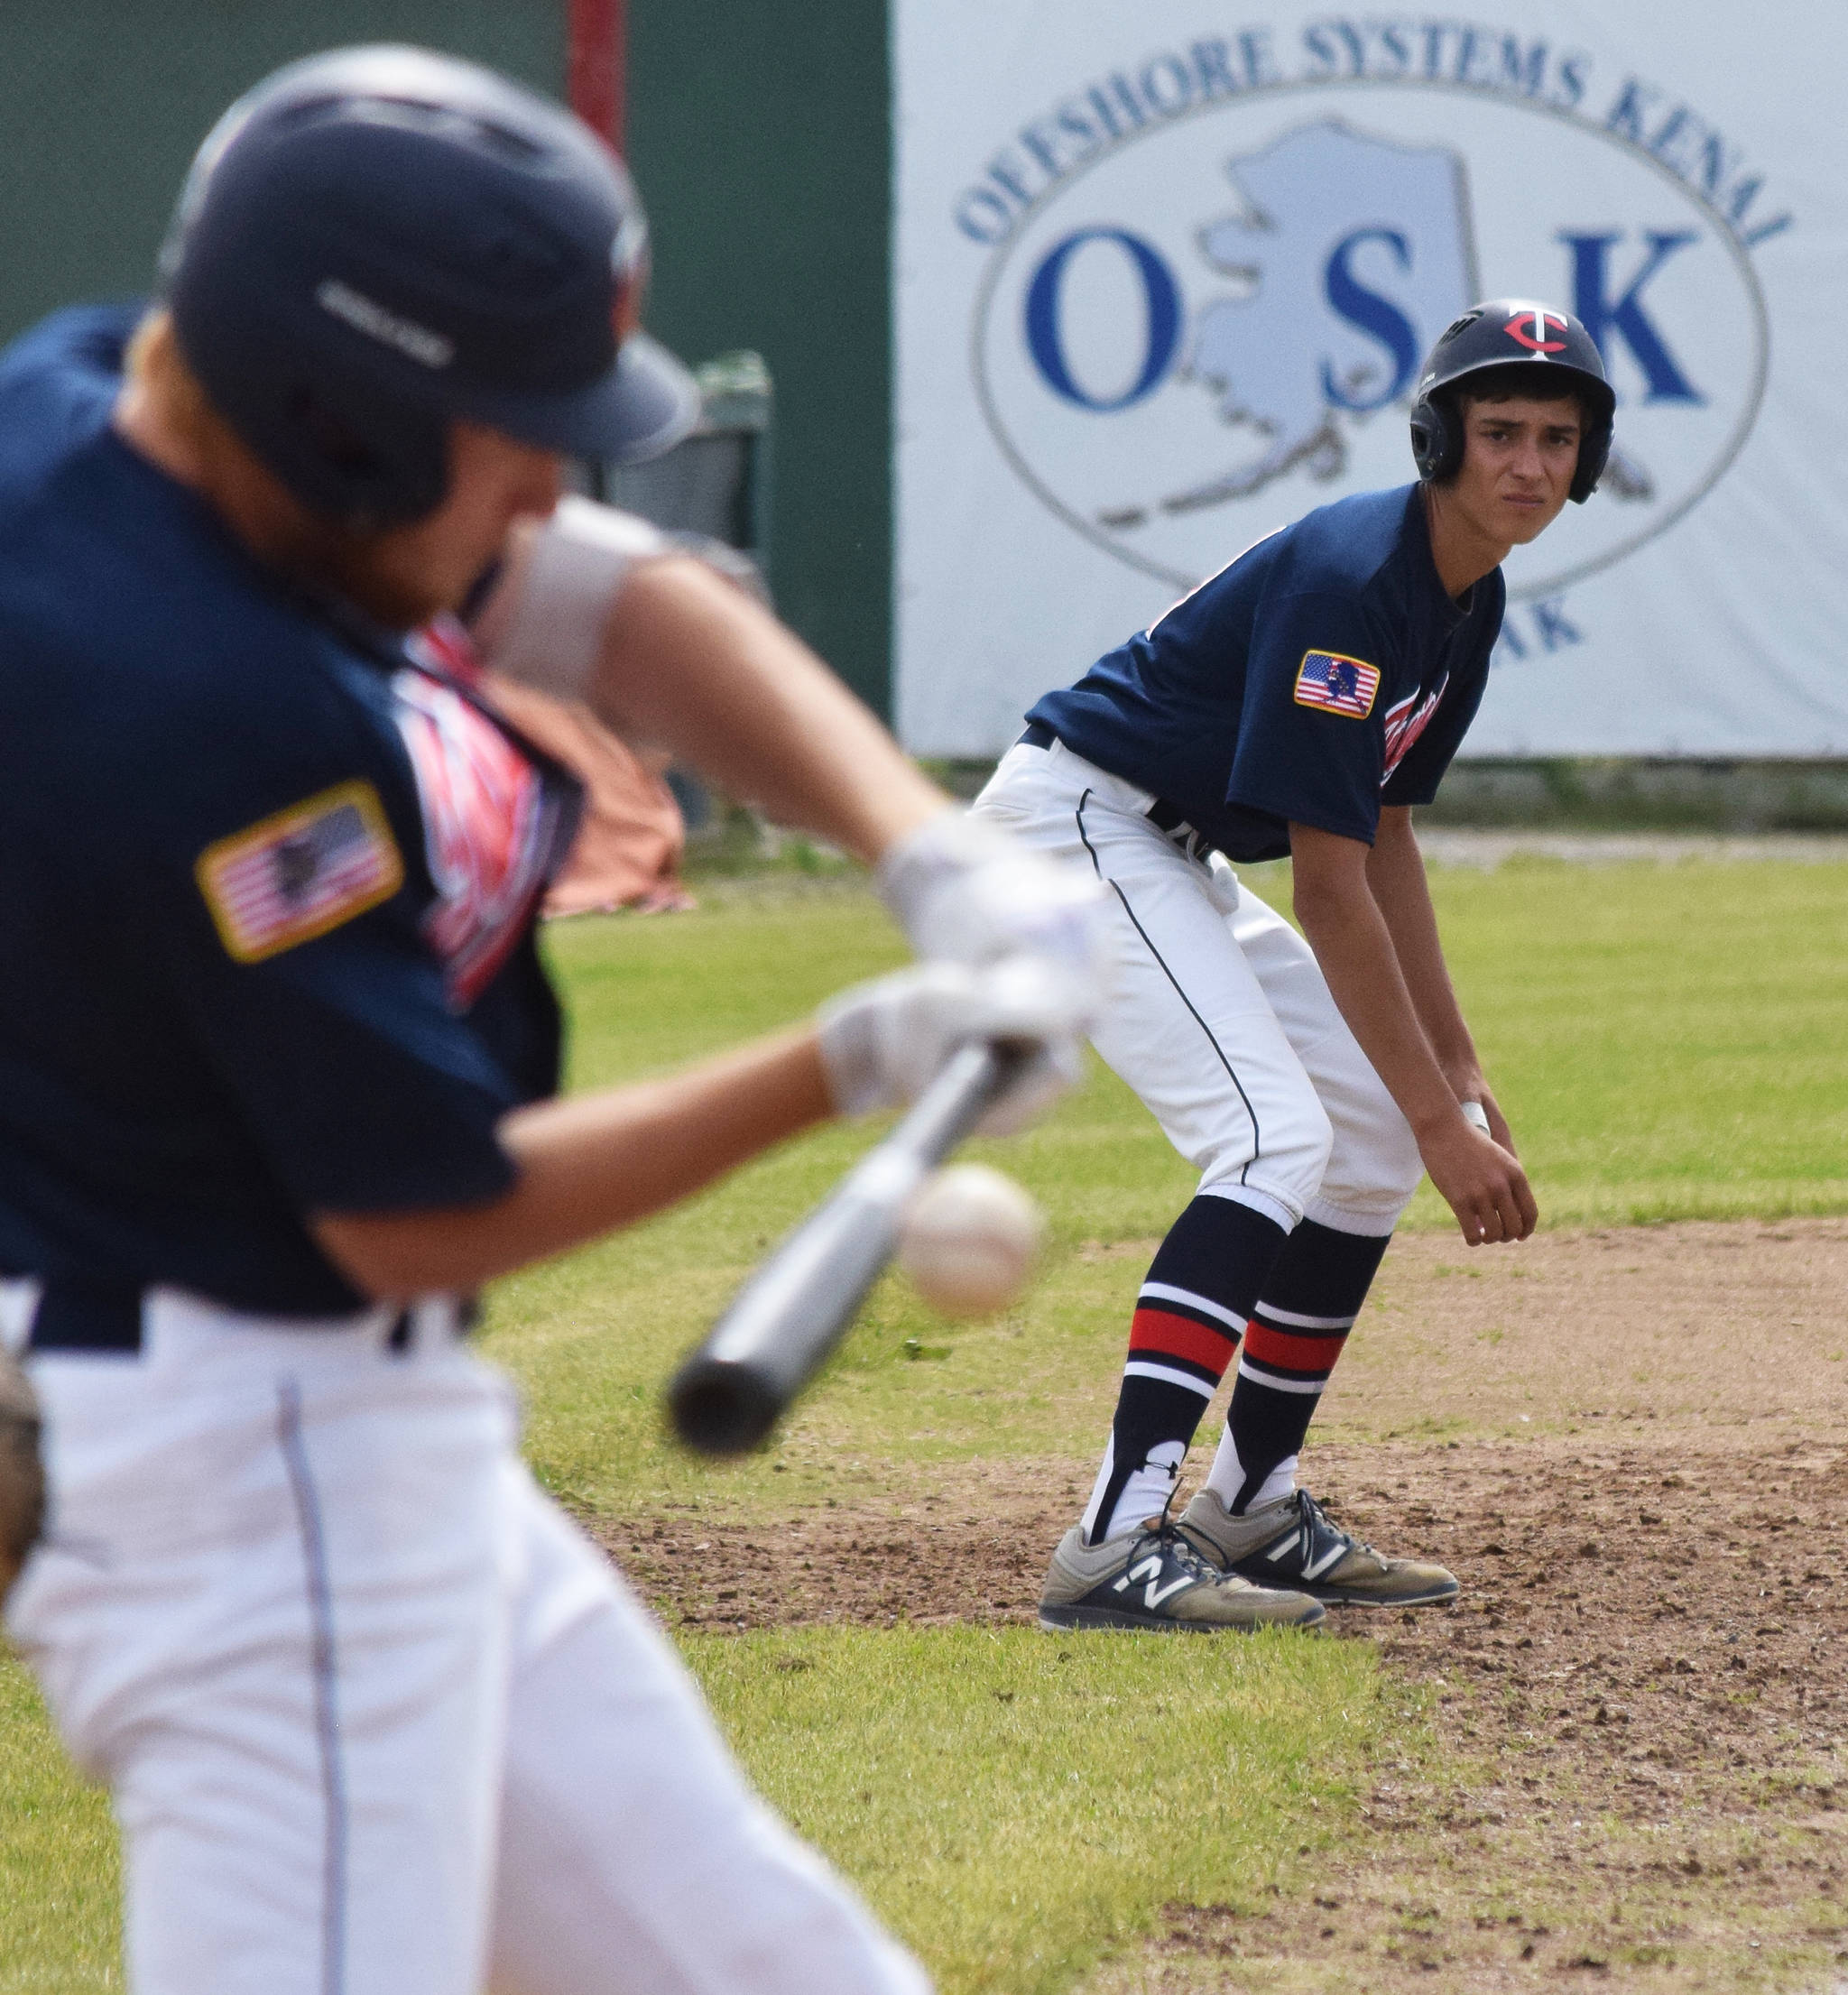 Twins pinch-runner Chris Jaime keeps an eye on teammate Jeremy Kupferschmid up to bat against the Eagle River Wolves Tuesday at the Bill Miller Big Fish Wood Bat Tournament at Coral Seymour Memorial Park in Kenai. (Photo by Joey Klecka/Peninsula Clarion